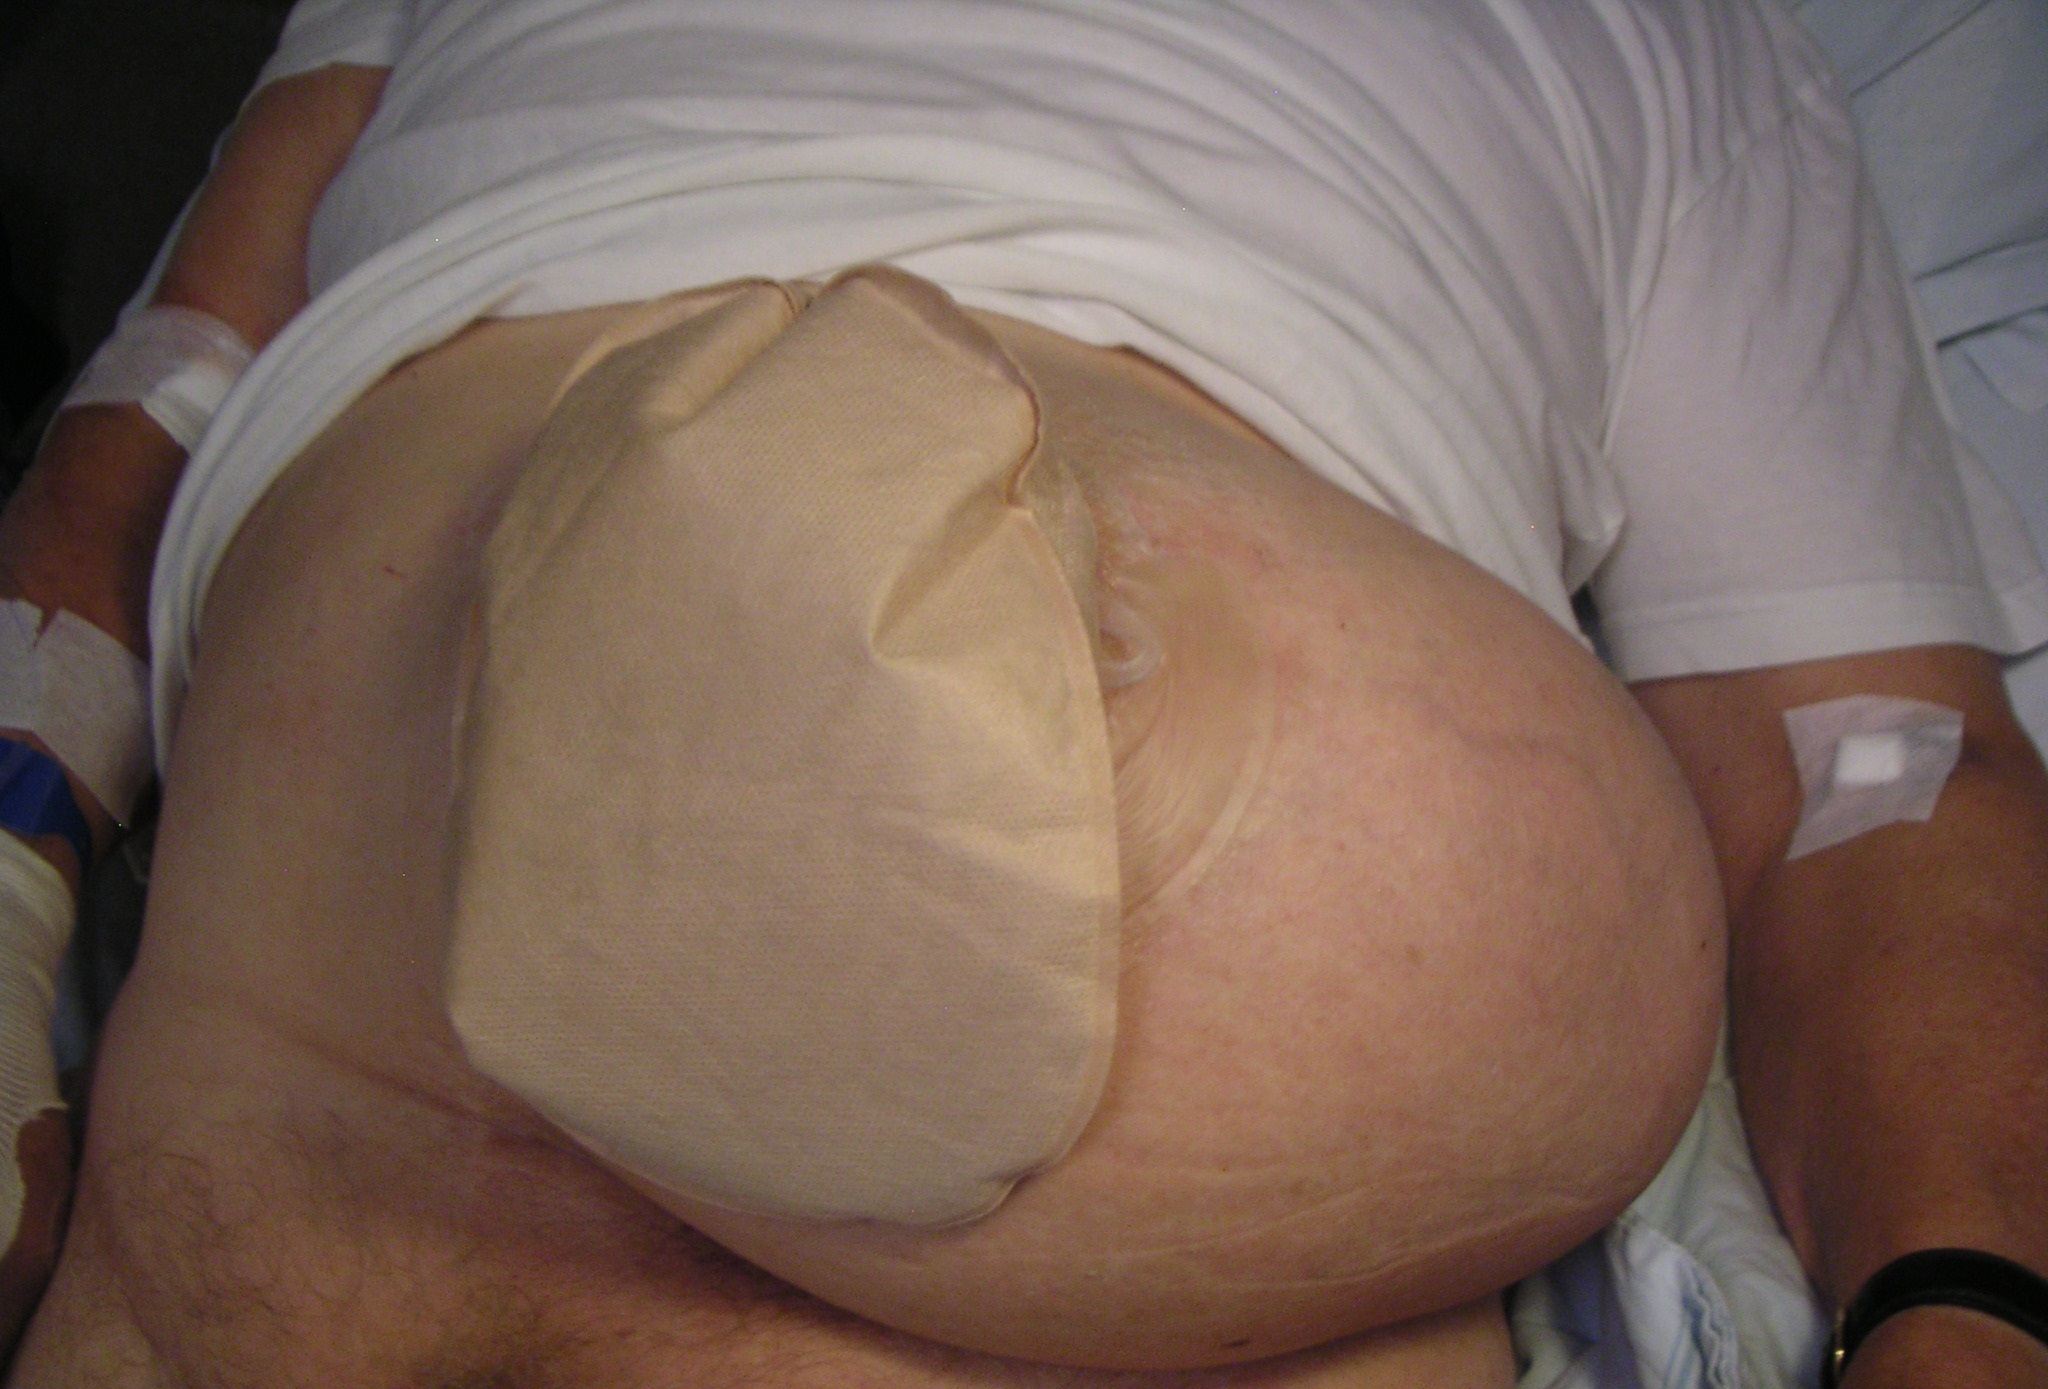 Patient with a colostomy complicated by a large parastomal hernia, which is when tissue protrudes adjacent to the stoma tract.